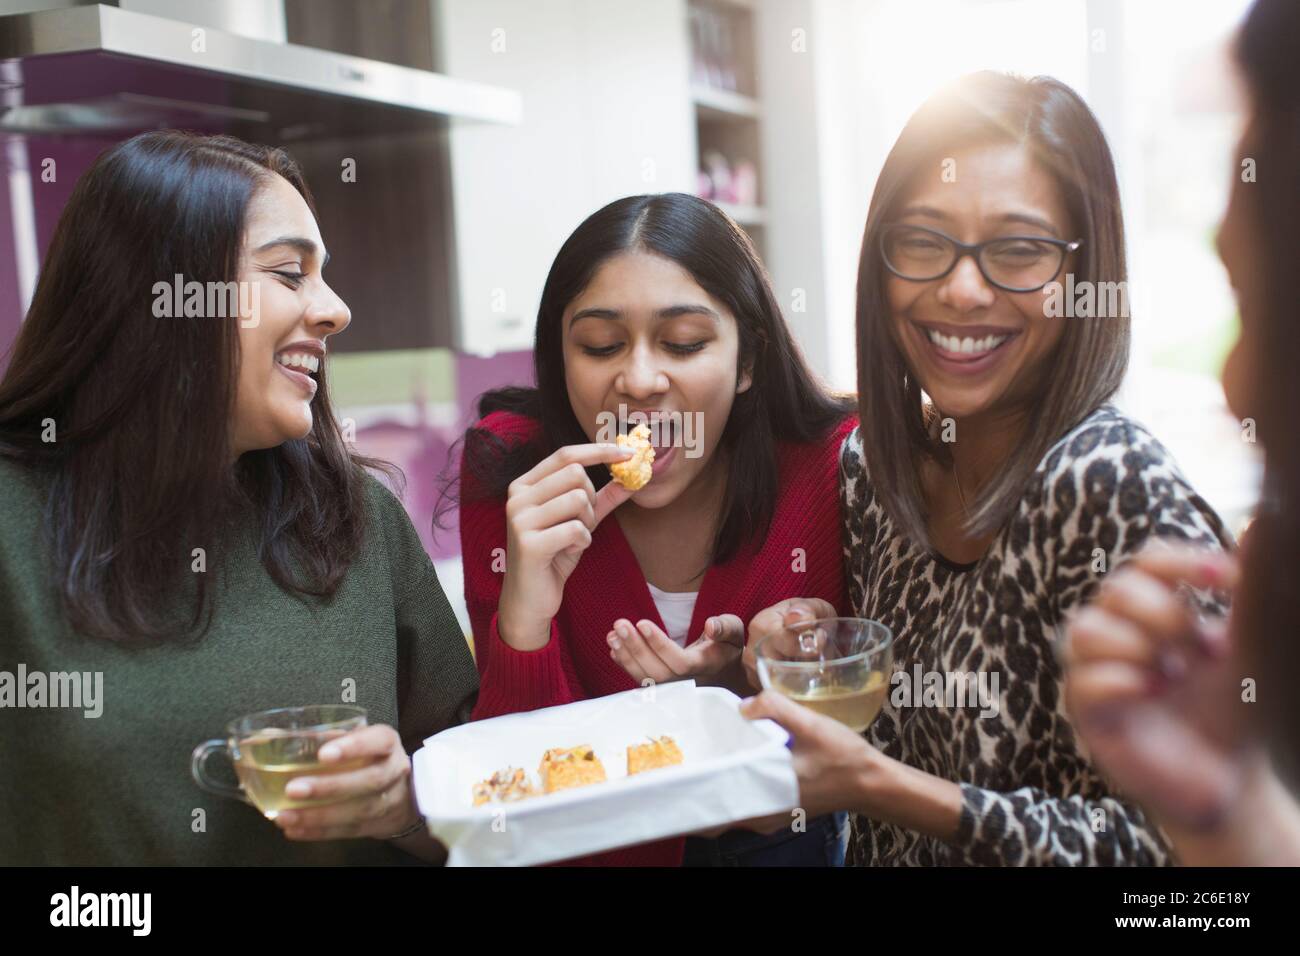 Happy family eating and drinking Stock Photo